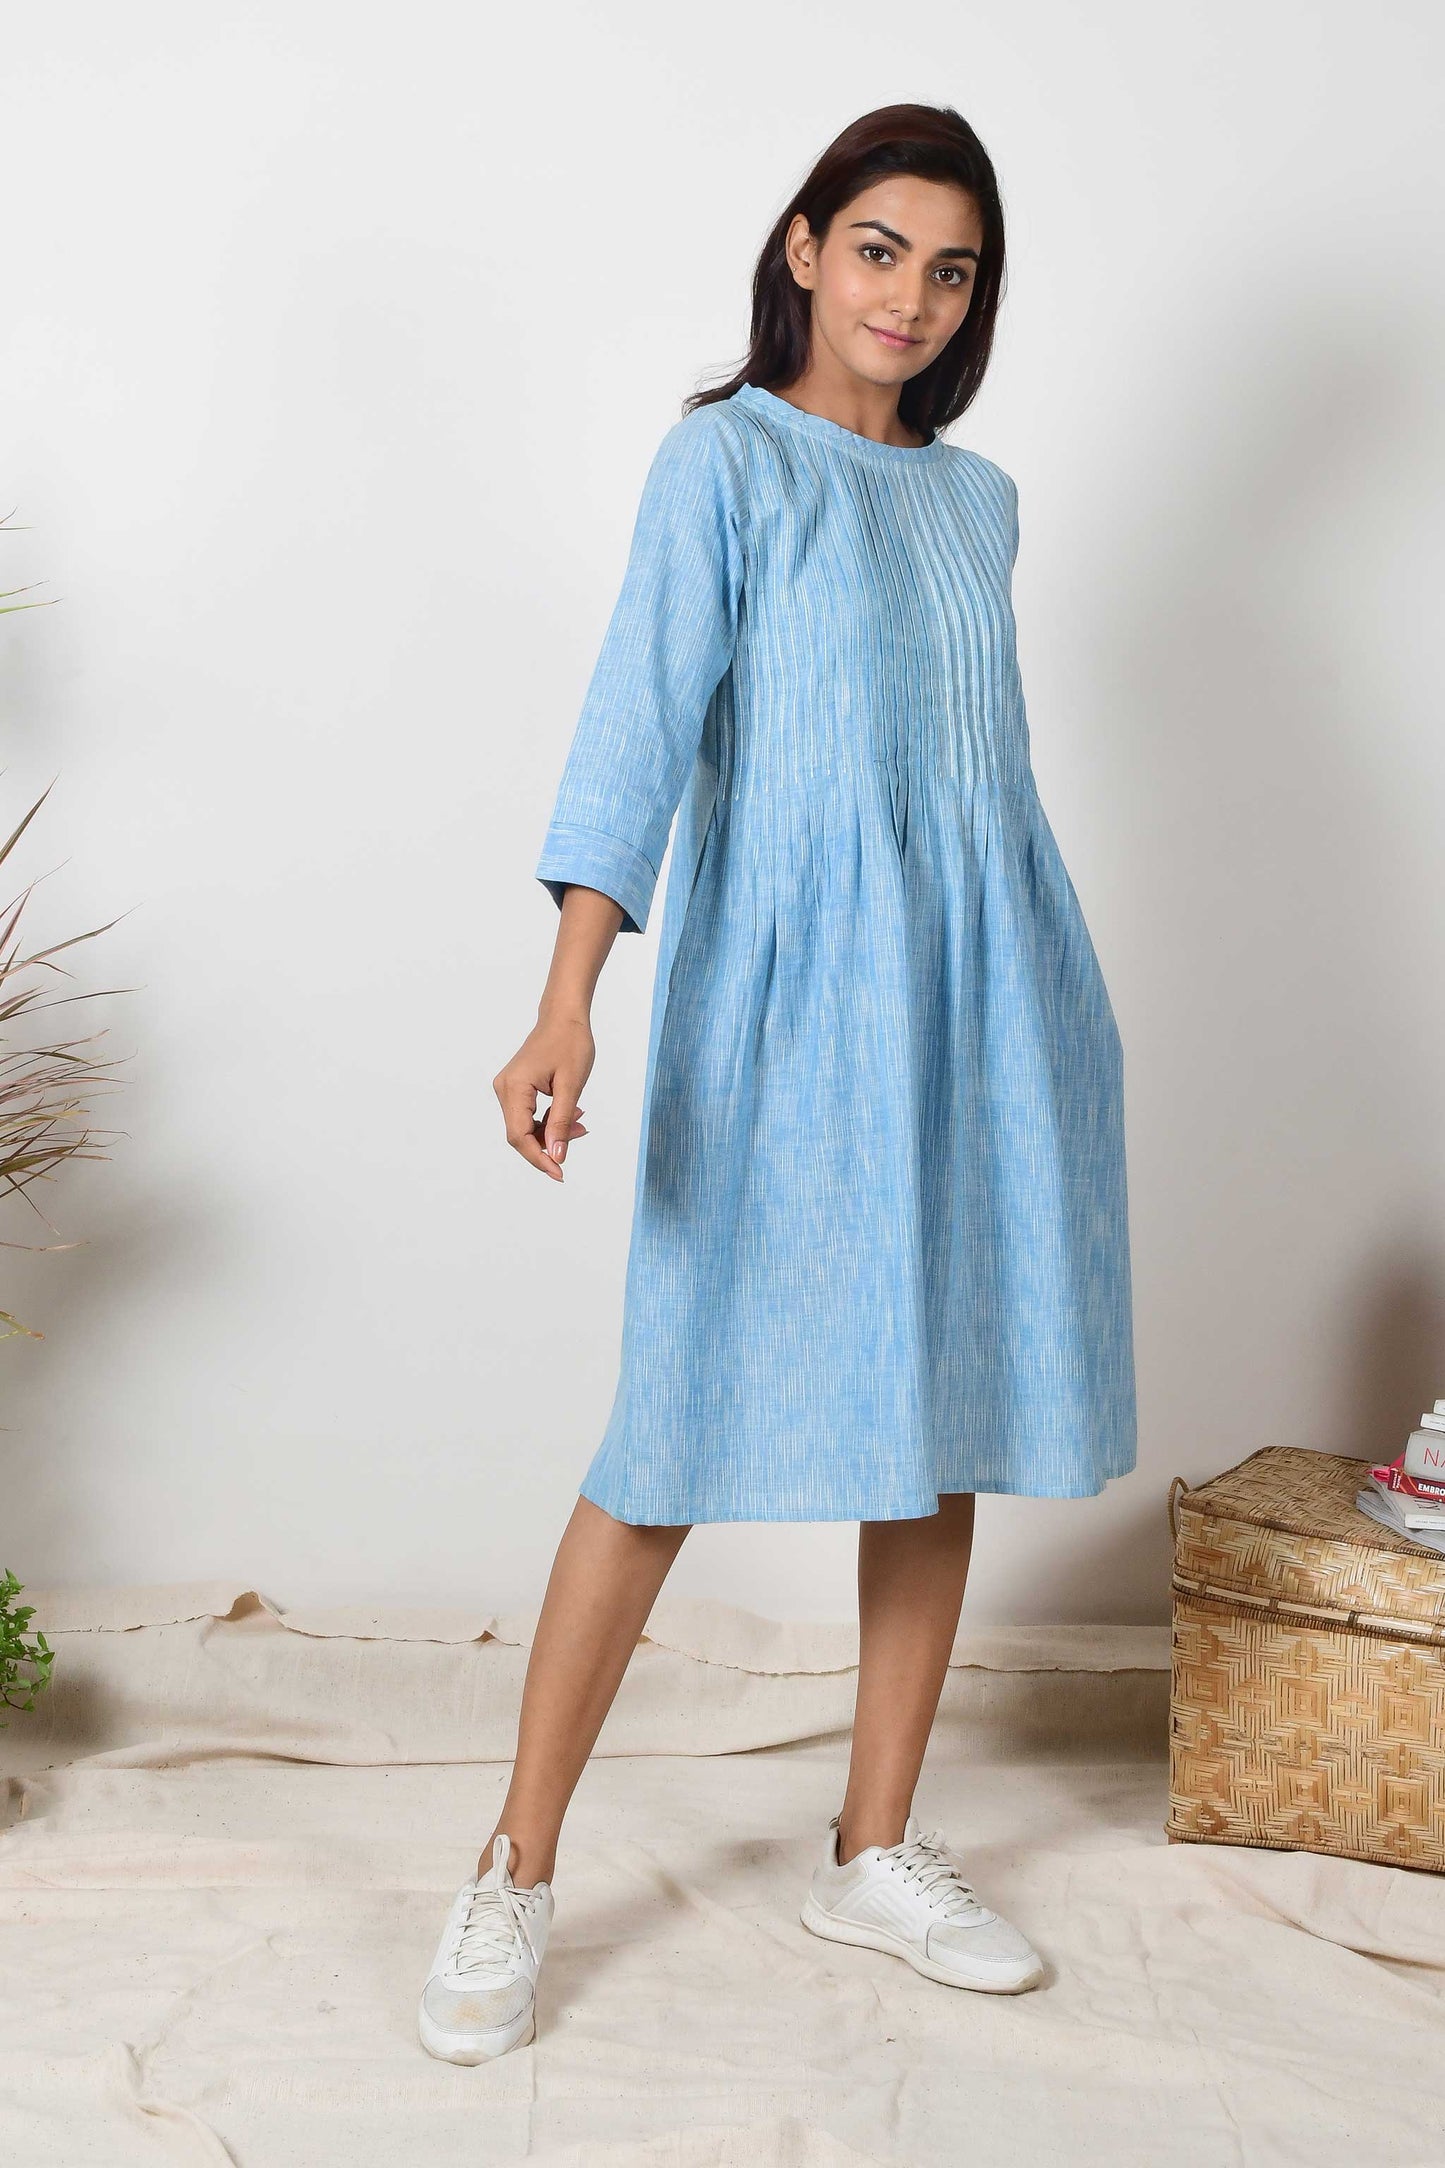 Indian girl wearing sky blue cotton pleated dress with a pair of white sneakers